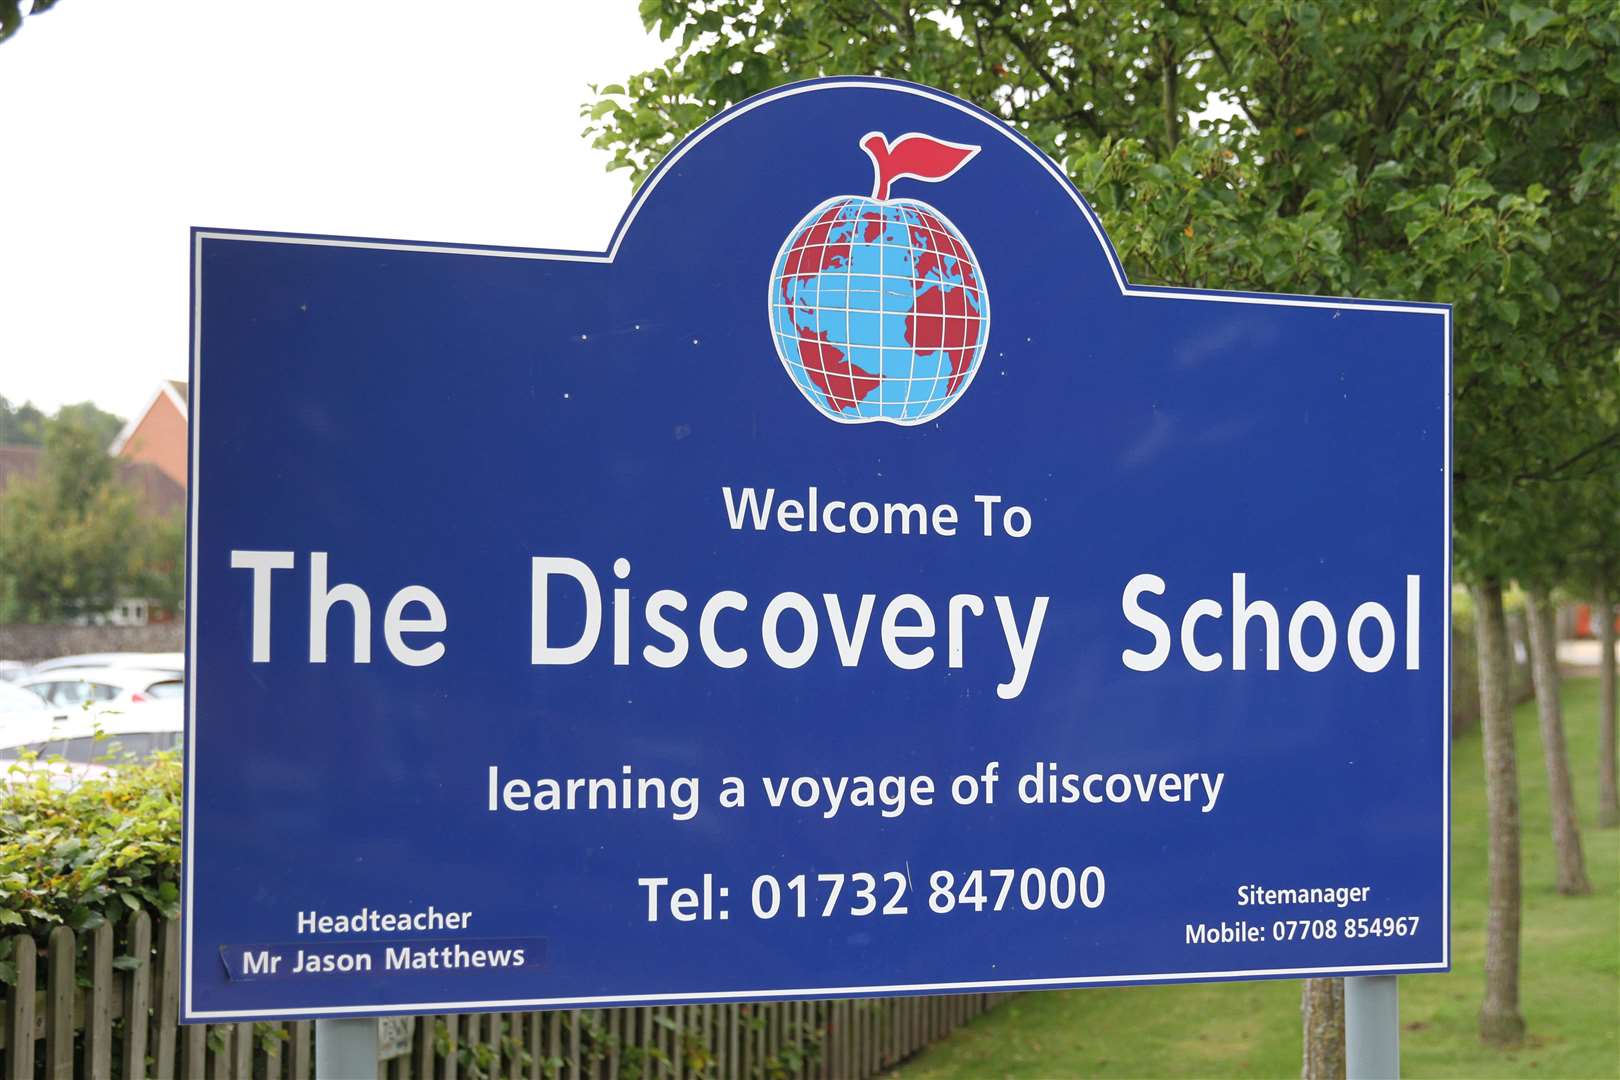 The Discovery School